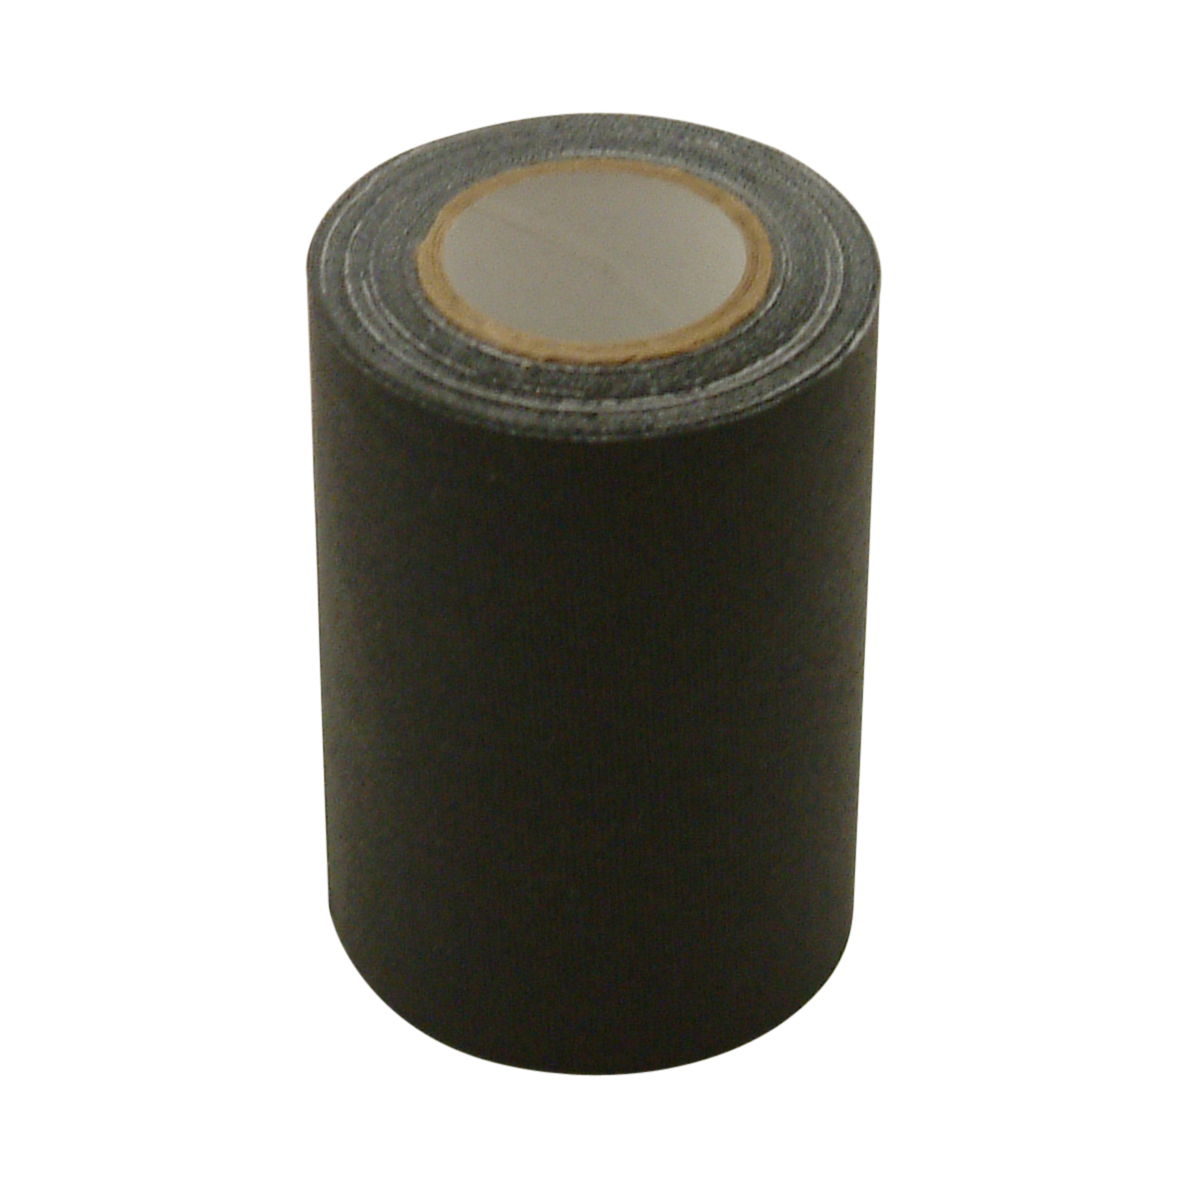 JVCC Patch & Repair Tape for Leather and Vinyl surfaces [Gaffers Tape]  (REPAIR-1): 3 in. (72mm actual) x 15 ft. (Black)